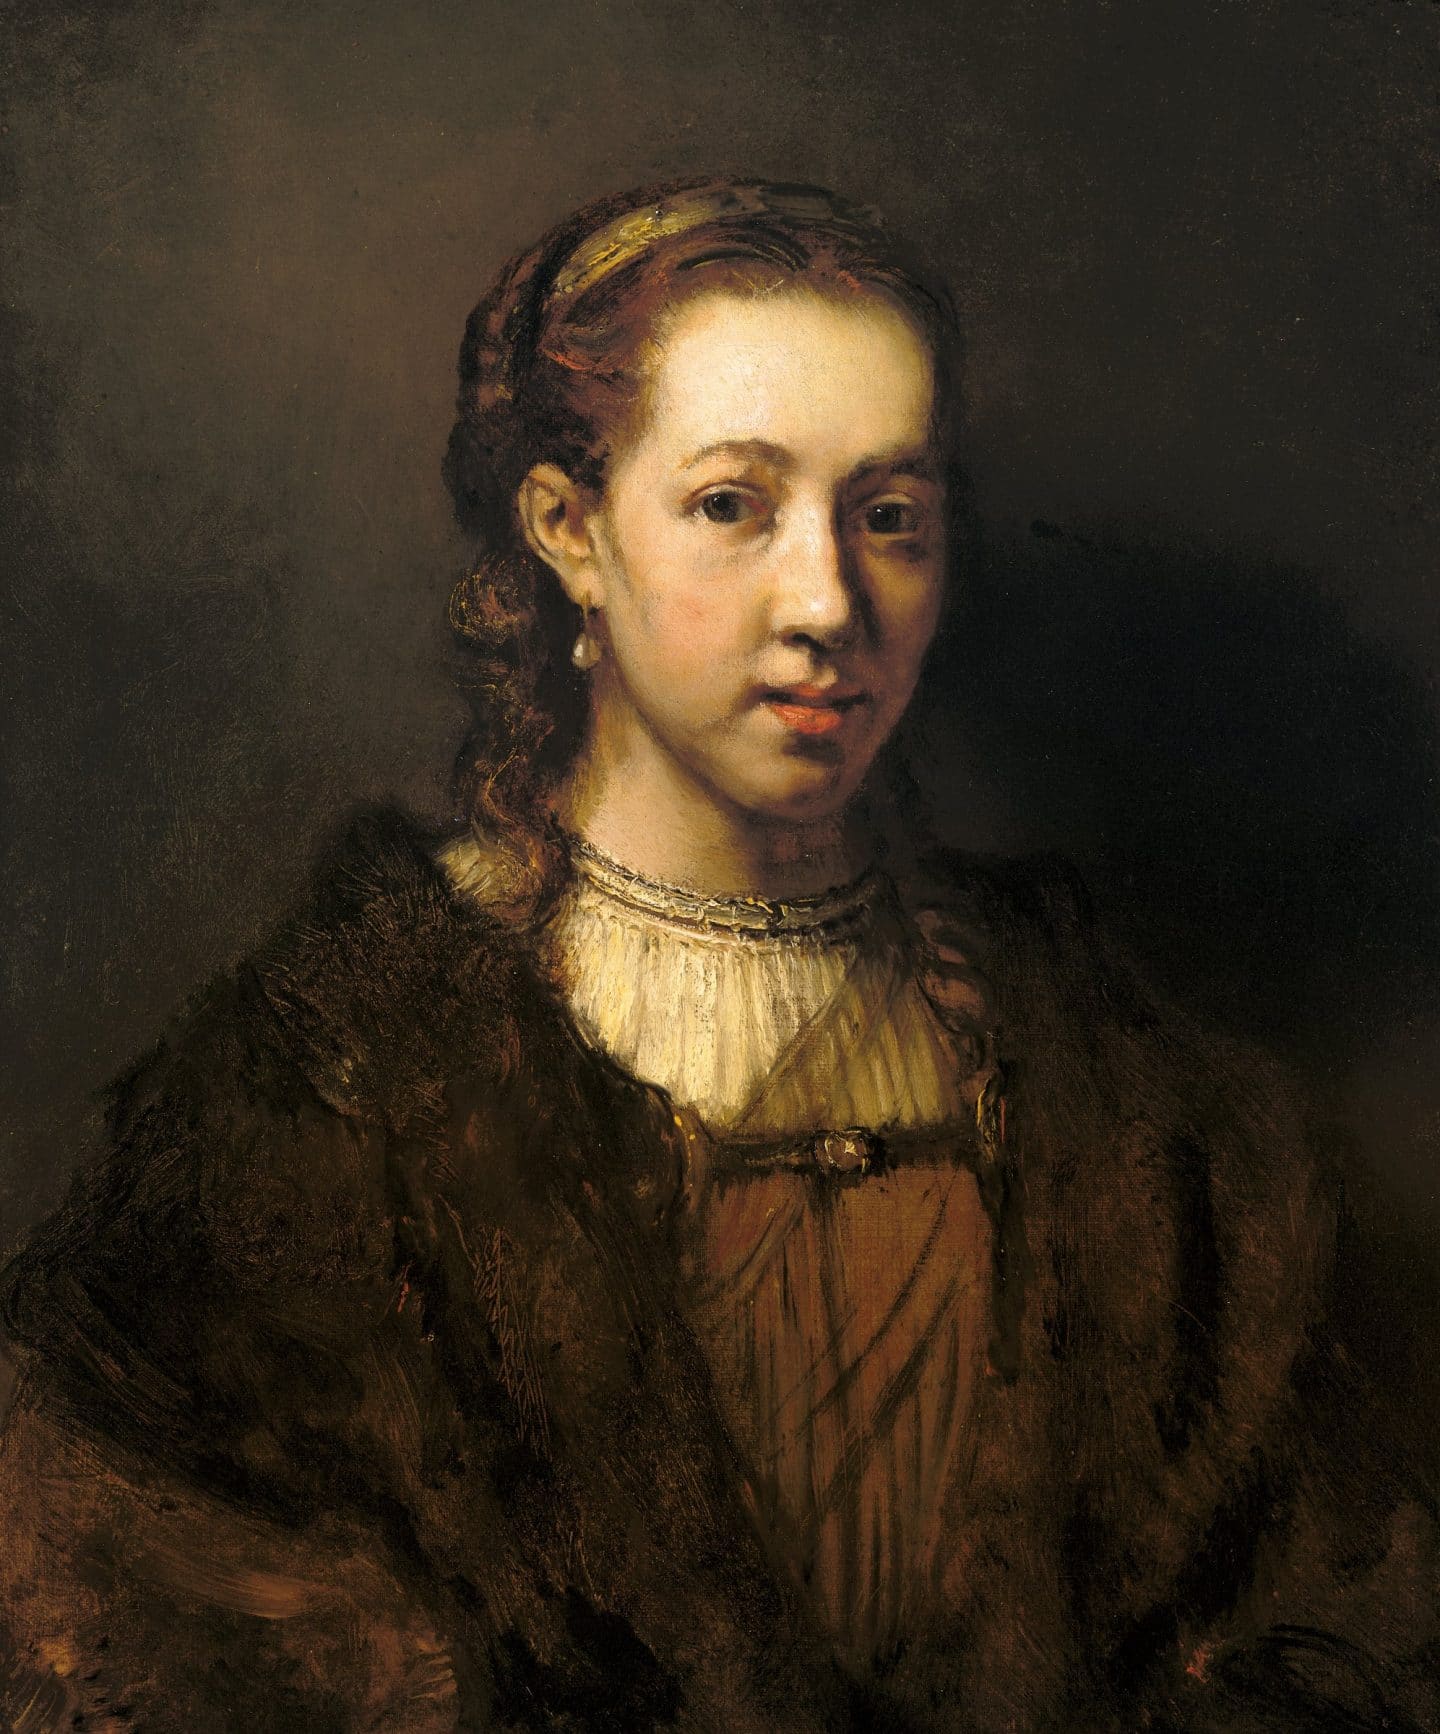 Jacobus Leveck (attributed to), Portrait of a Woman probably Hendrickje Stoffels, 1653, oil on canvas. Gift of Isabel Bader, 2019.